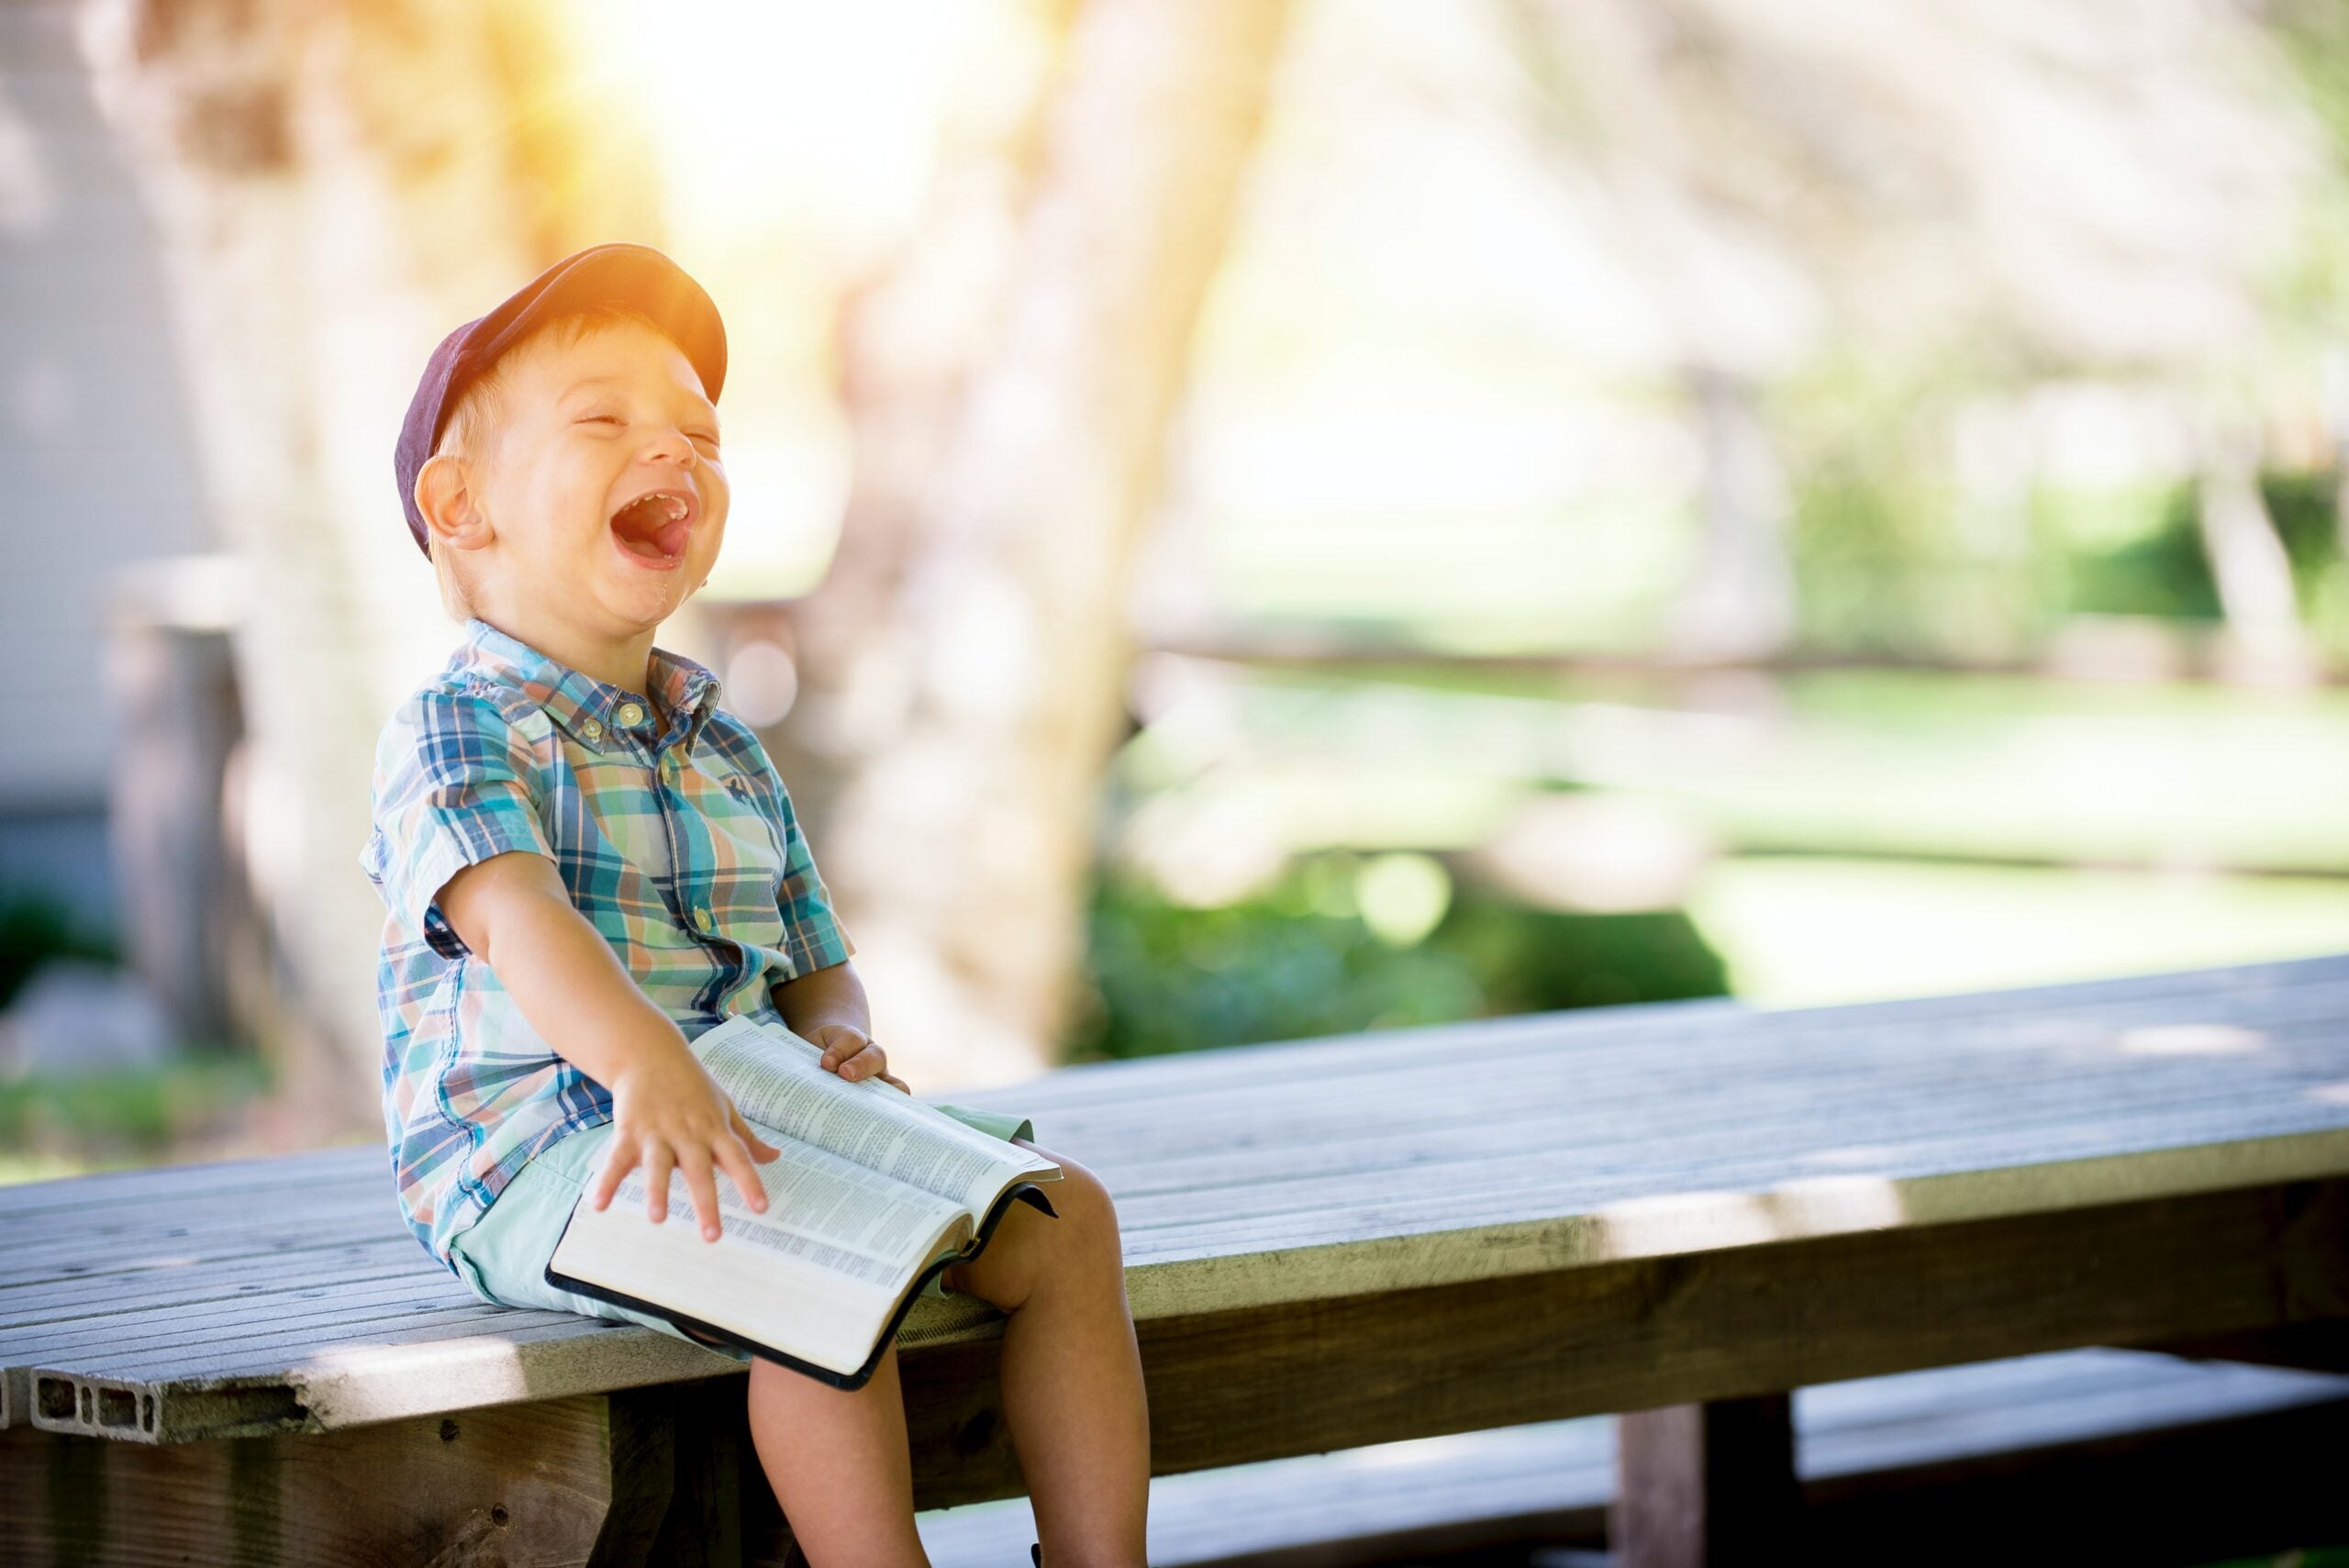 Child sitting on a bench with a book laughing